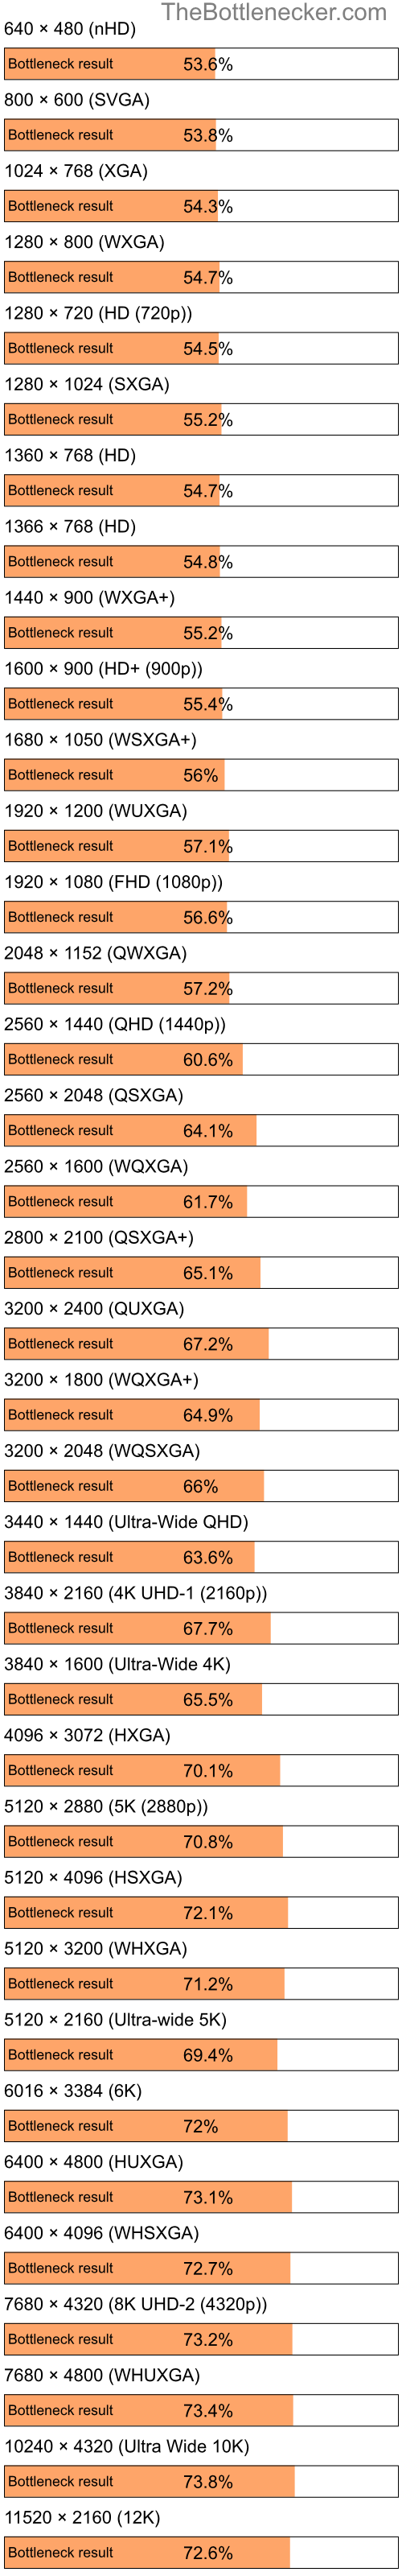 Bottleneck results by resolution for Intel Pentium 4 and AMD M860G with Mobility Radeon 4100 in Processor Intense Tasks